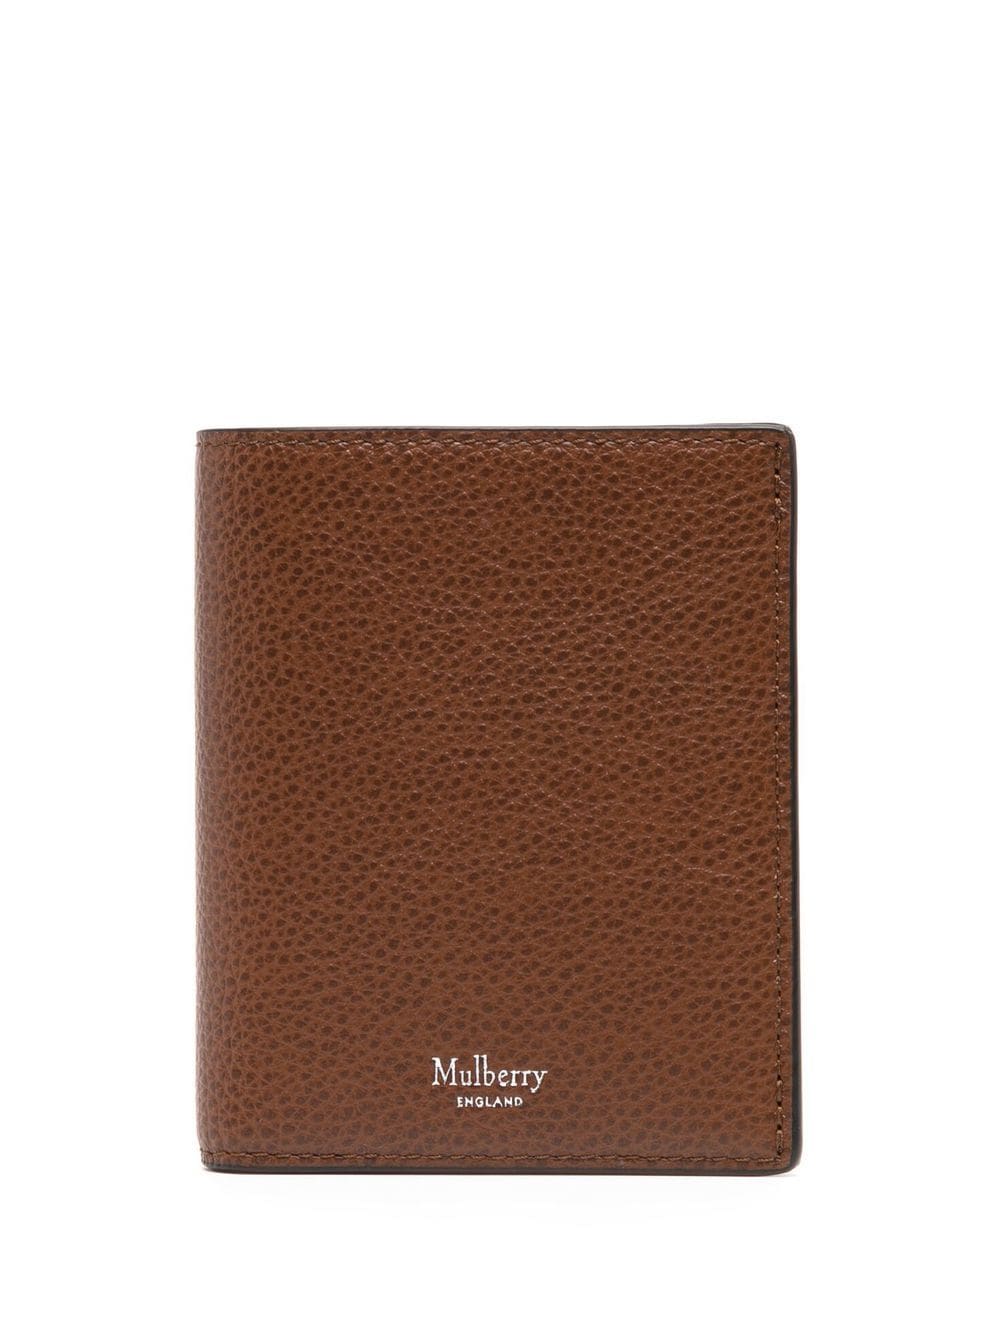 Mulberry Daisy trifold leather wallet - Brown von Mulberry